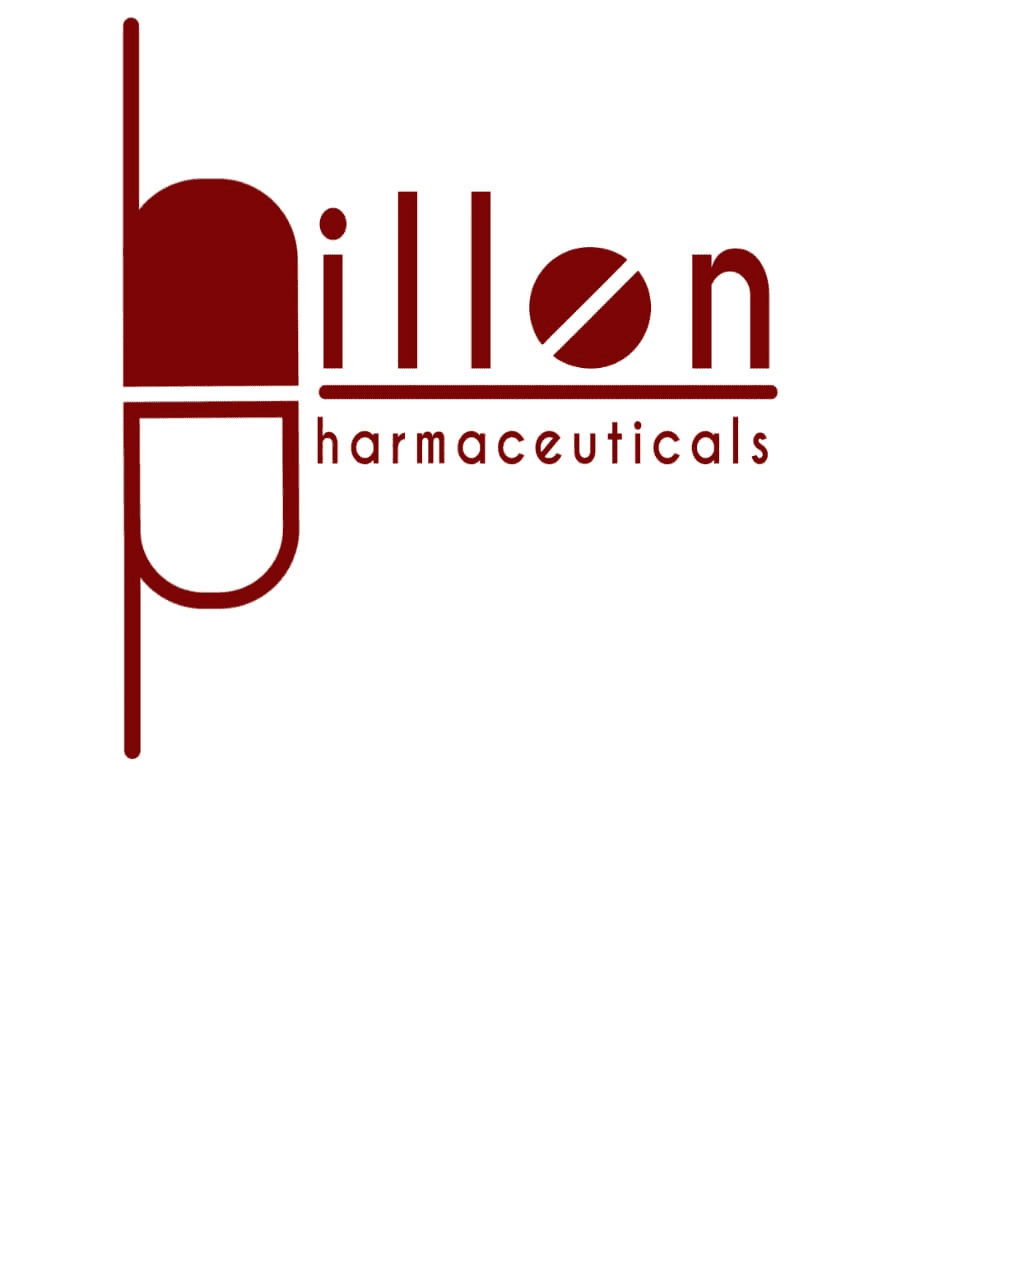 Hillon Pharmaceuticals private limited